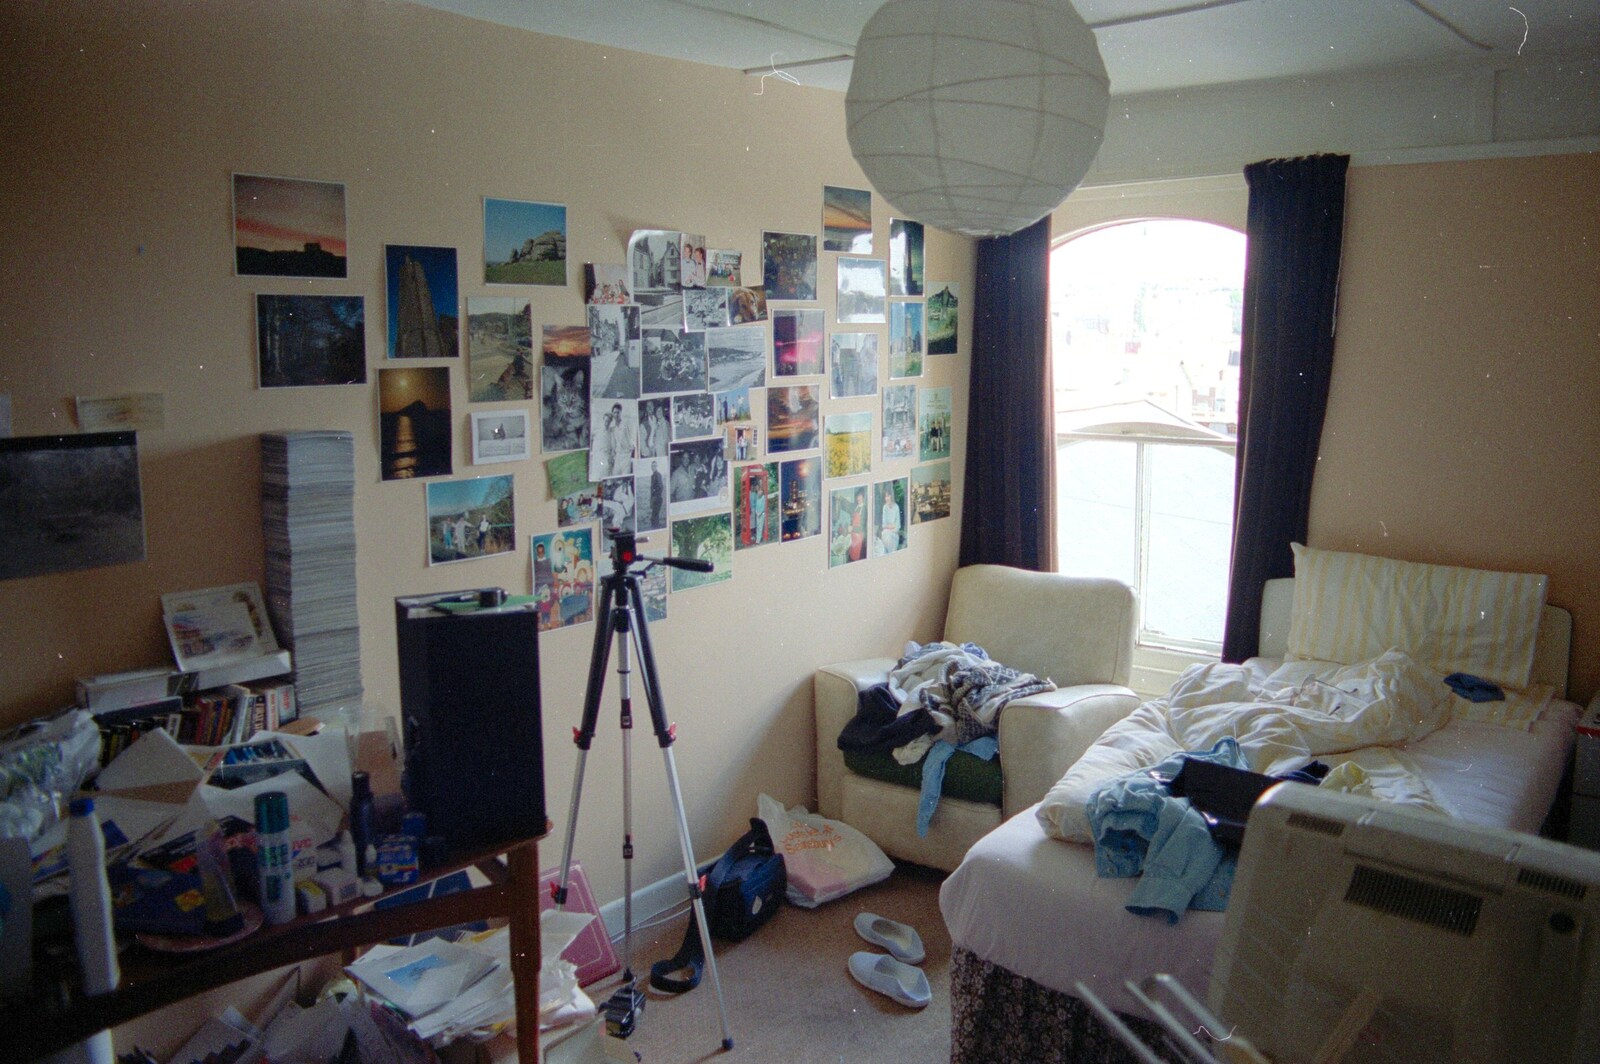 Uni: Risky Business, A Wedding Occurs and Dave Leaves, Wyndham Square, Plymouth - 15th July 1989: The bedroom photo wall